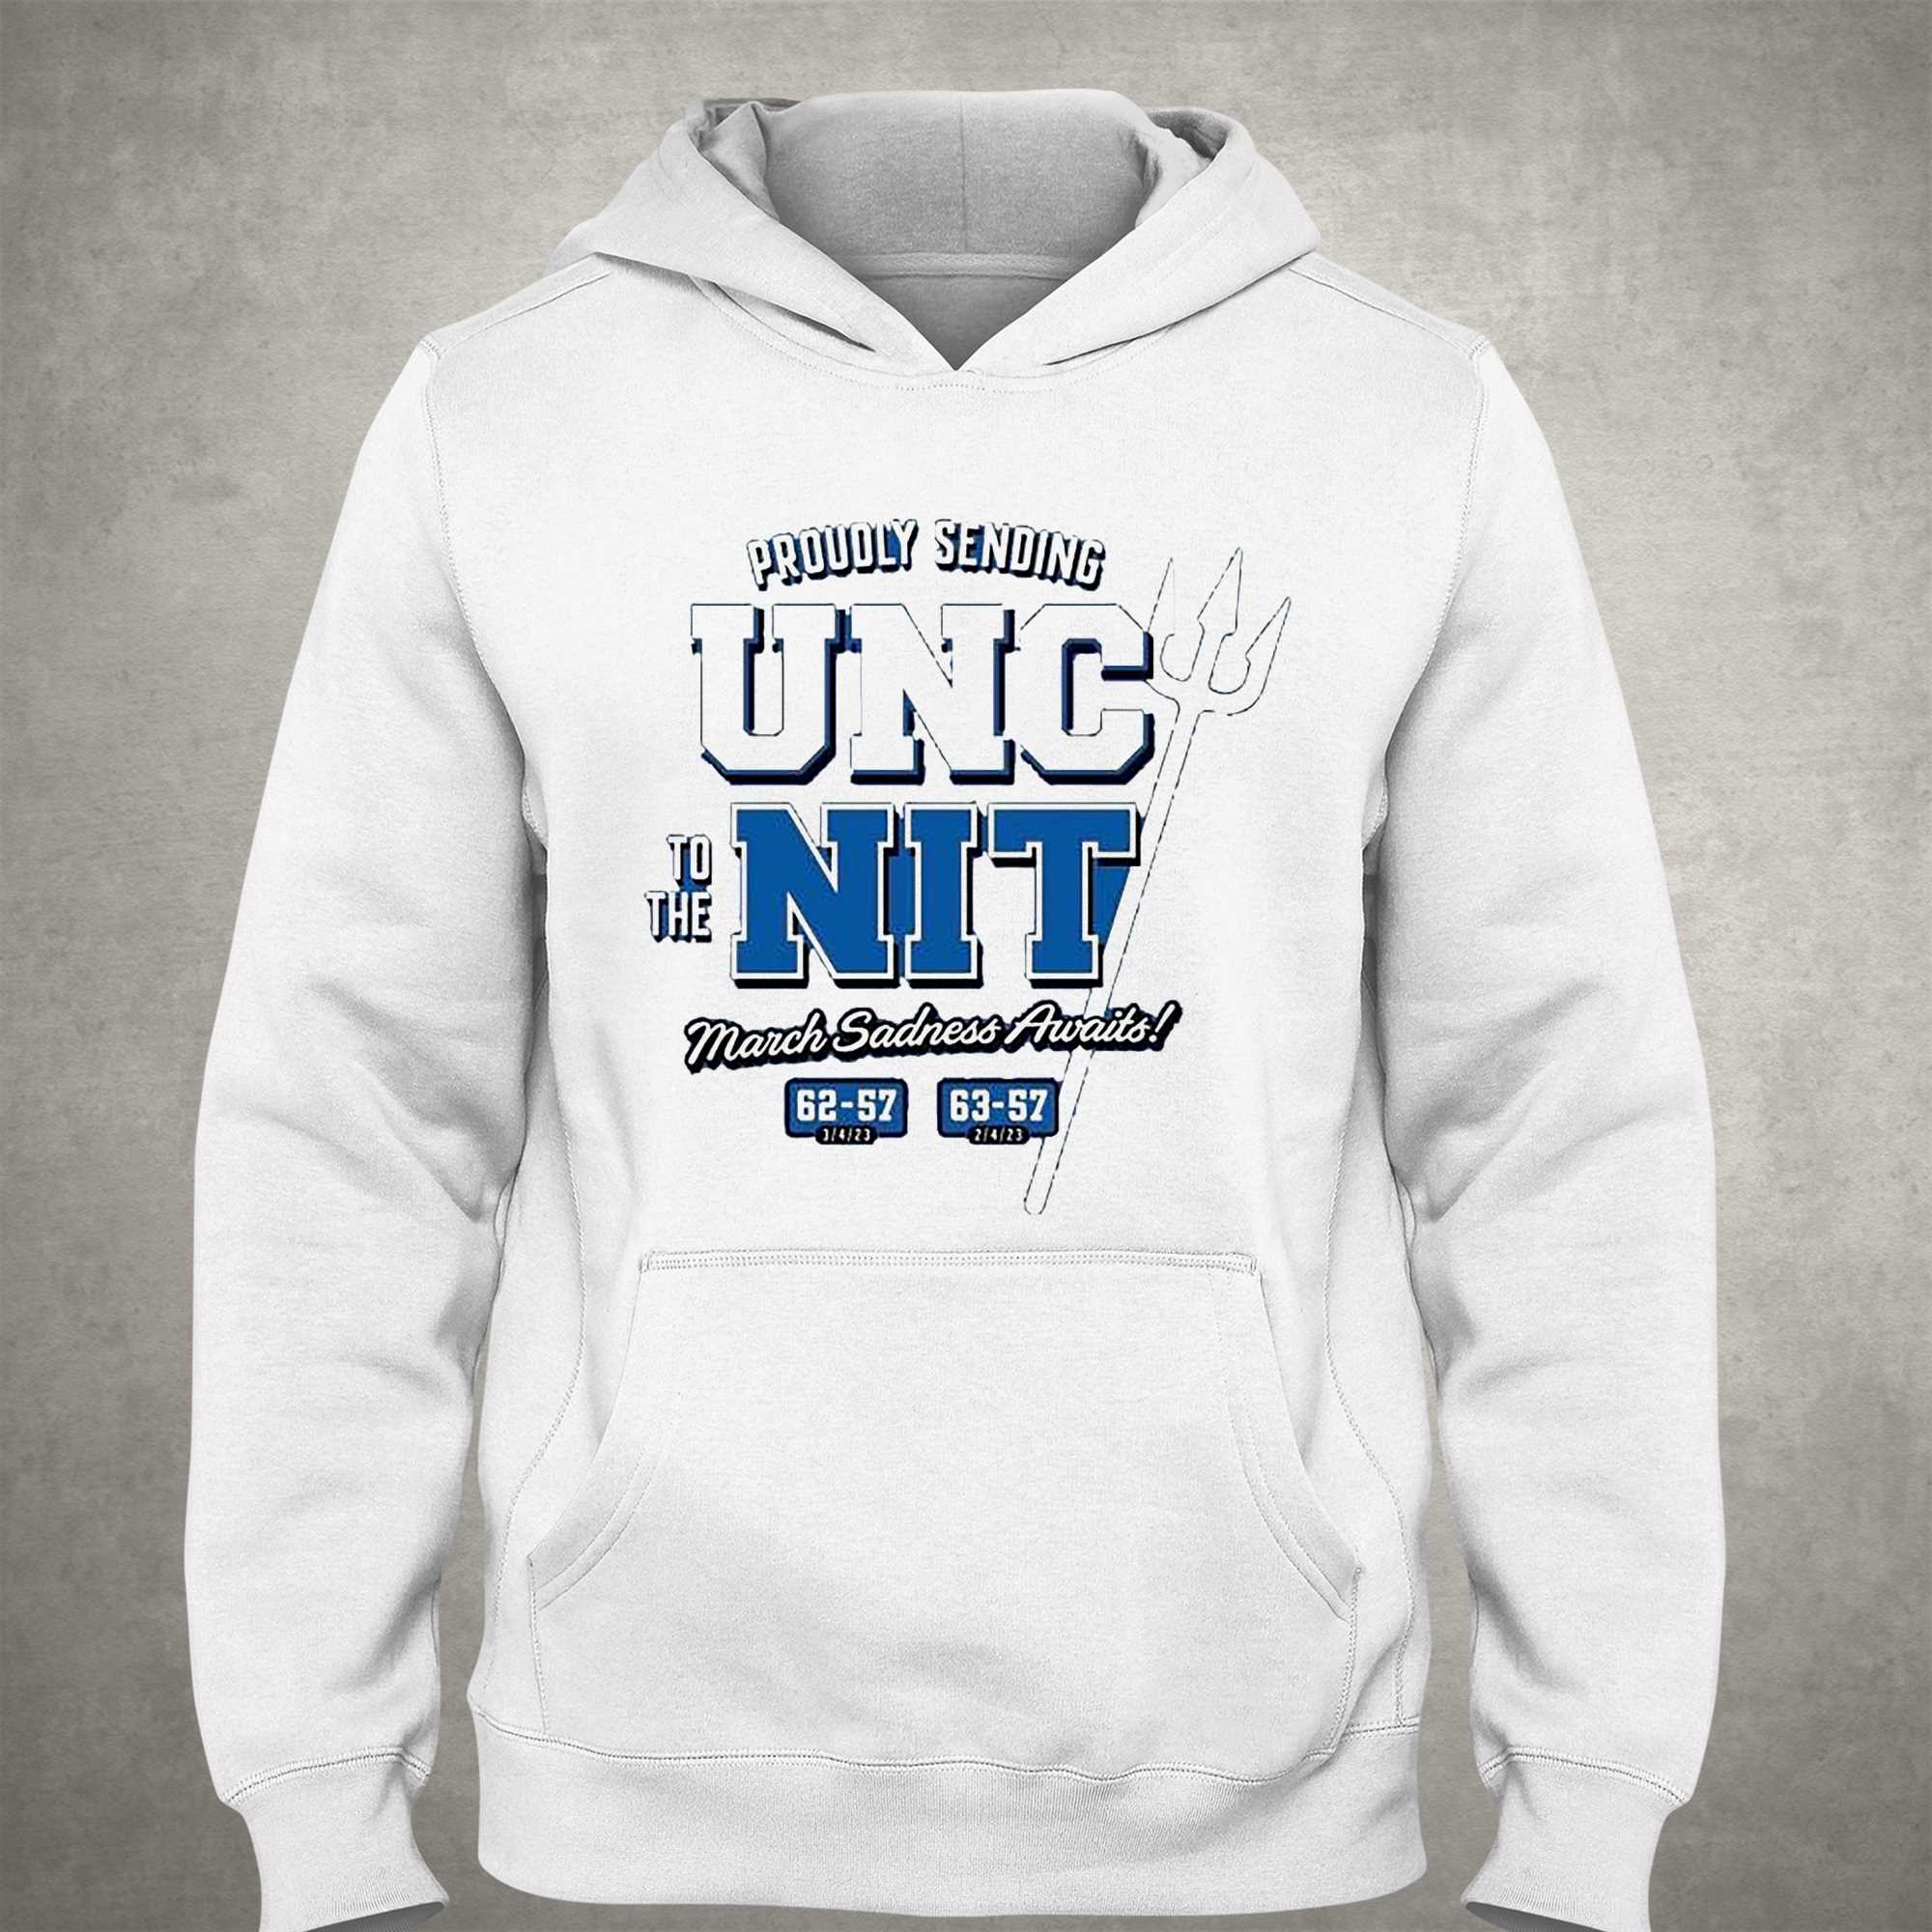 Duke College Basketball Proudly Sending Unc To The Nit March Sadness Awaits T-shirt 